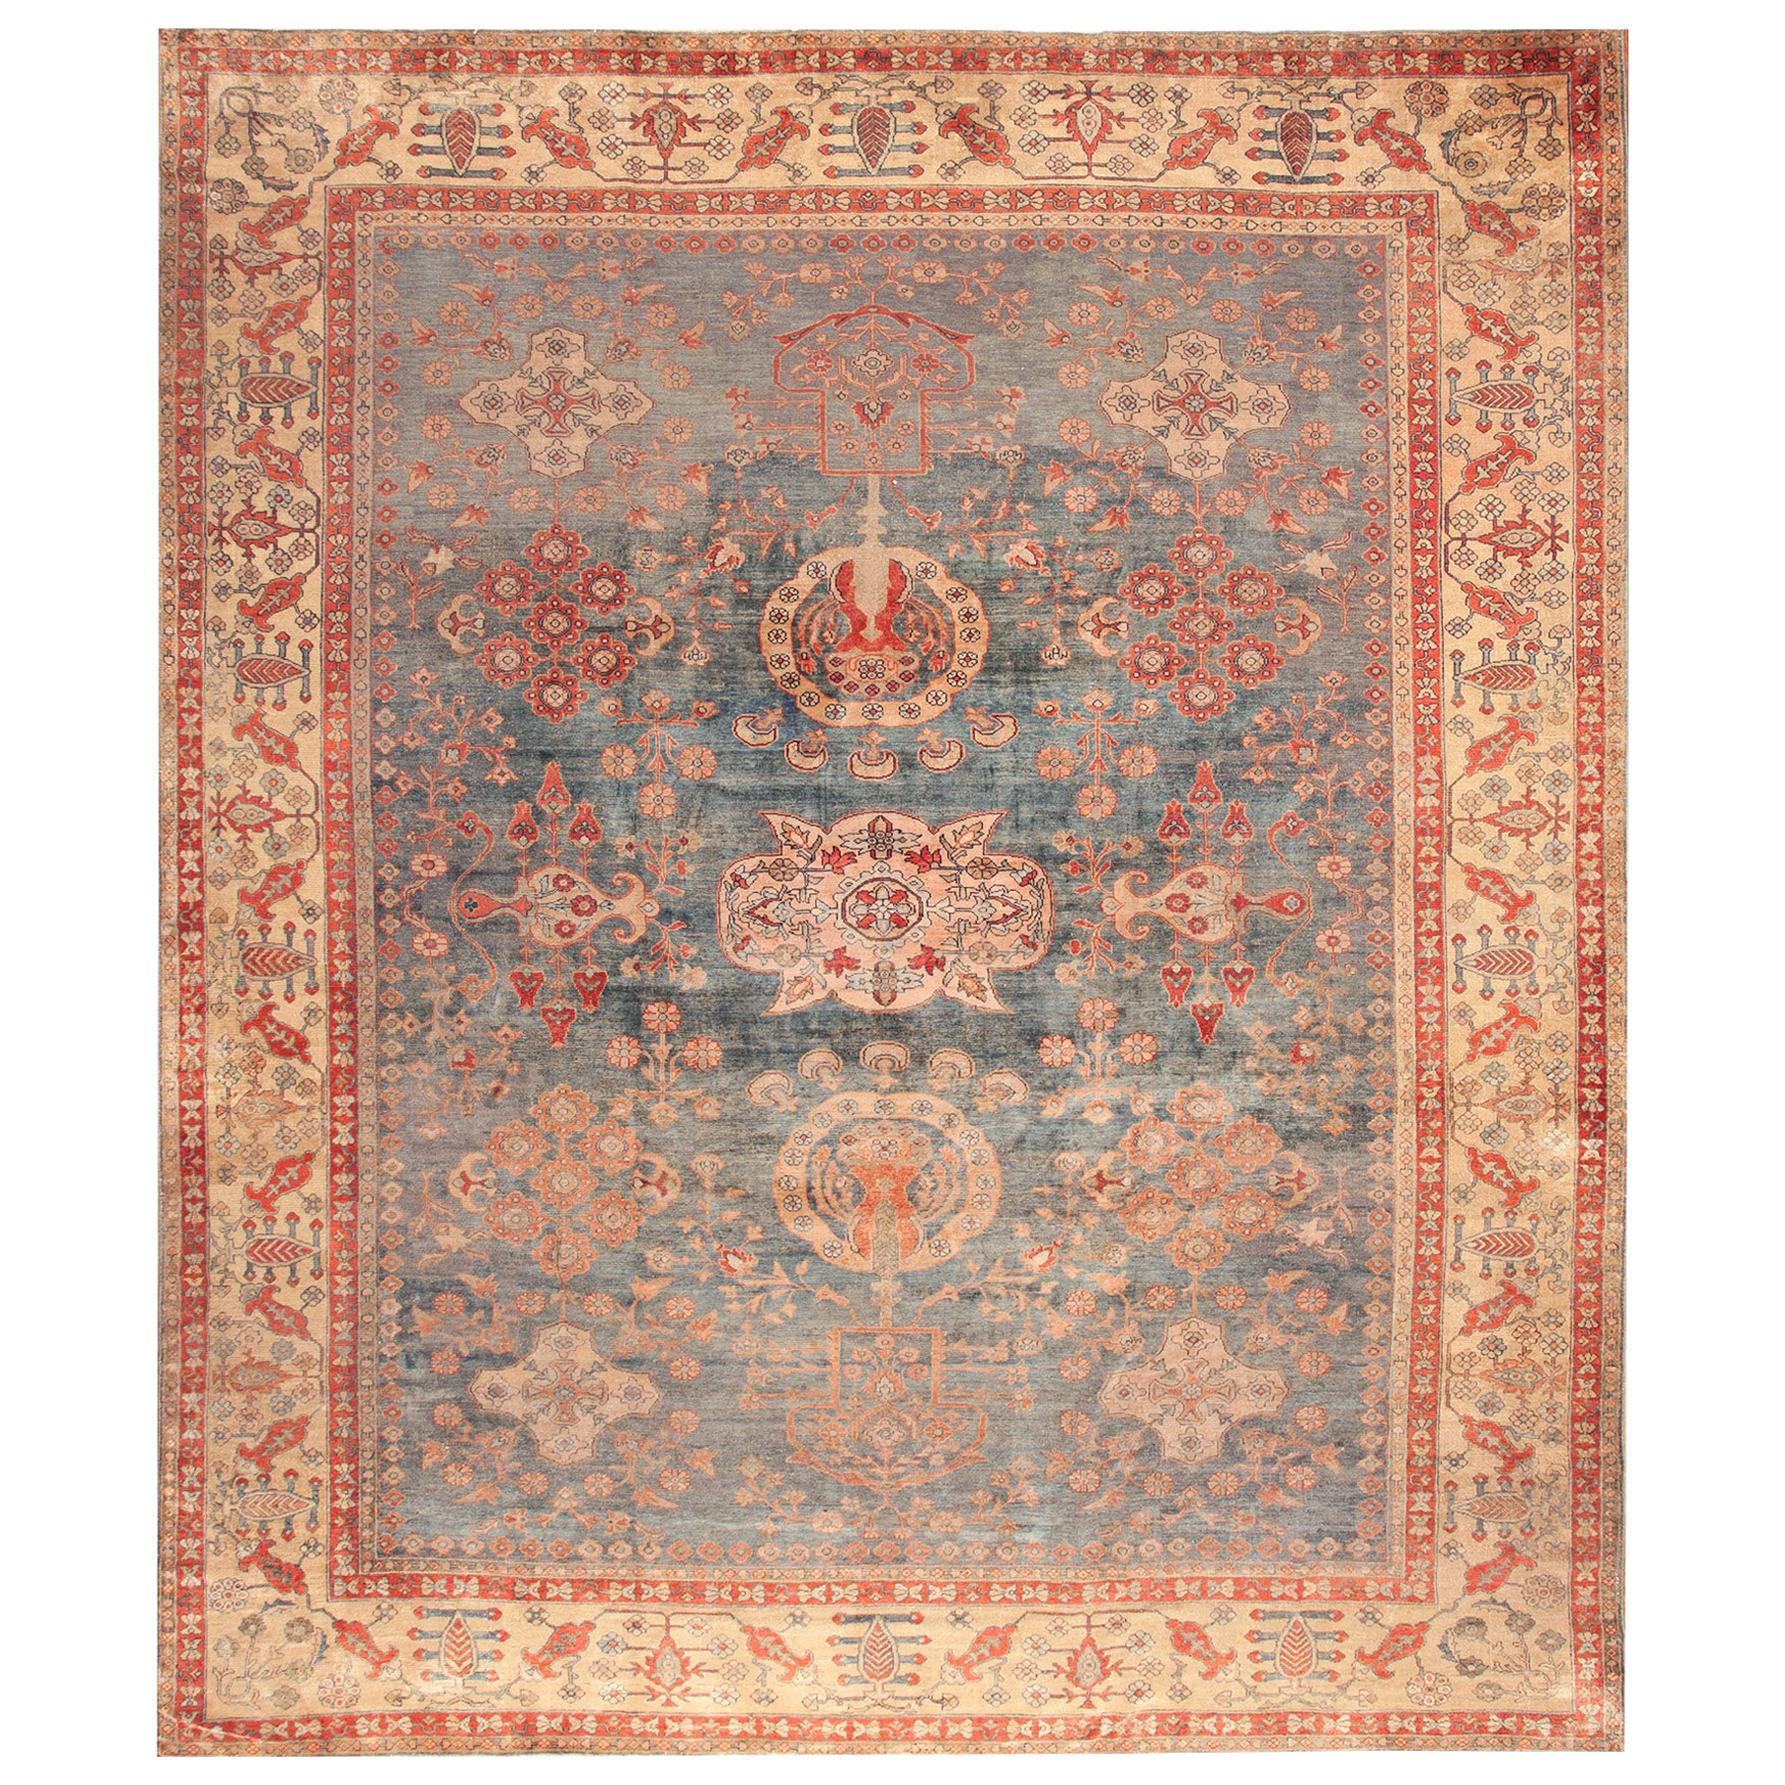 Early 20th Century Persian Malayer Carpet ( 11' x 12'8" - 335 - 385 ) For Sale